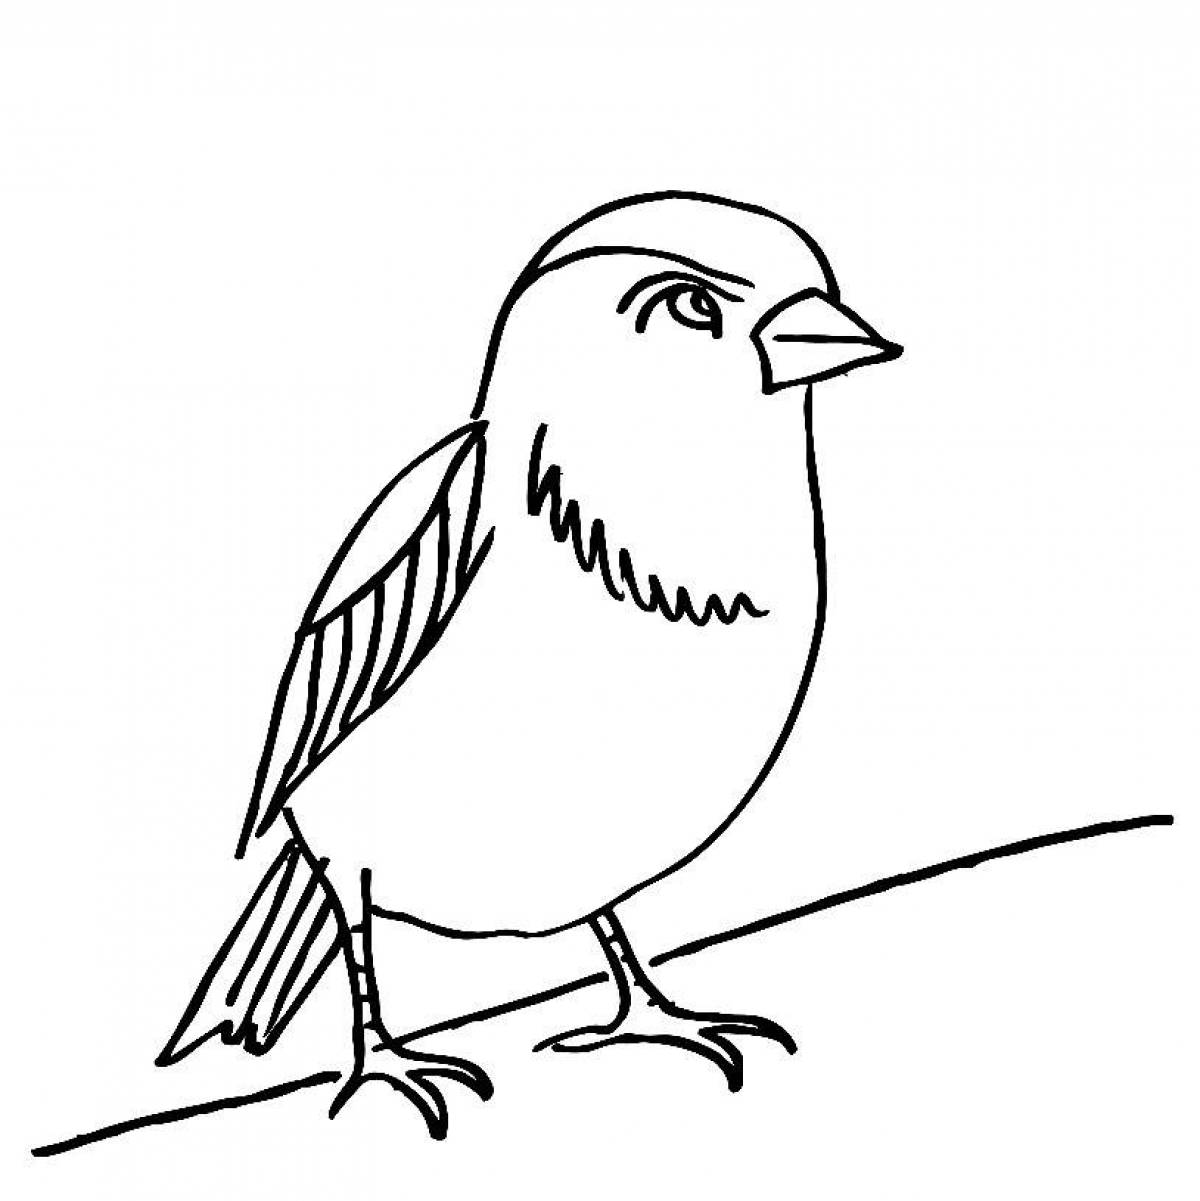 Fun coloring book sparrow for kids